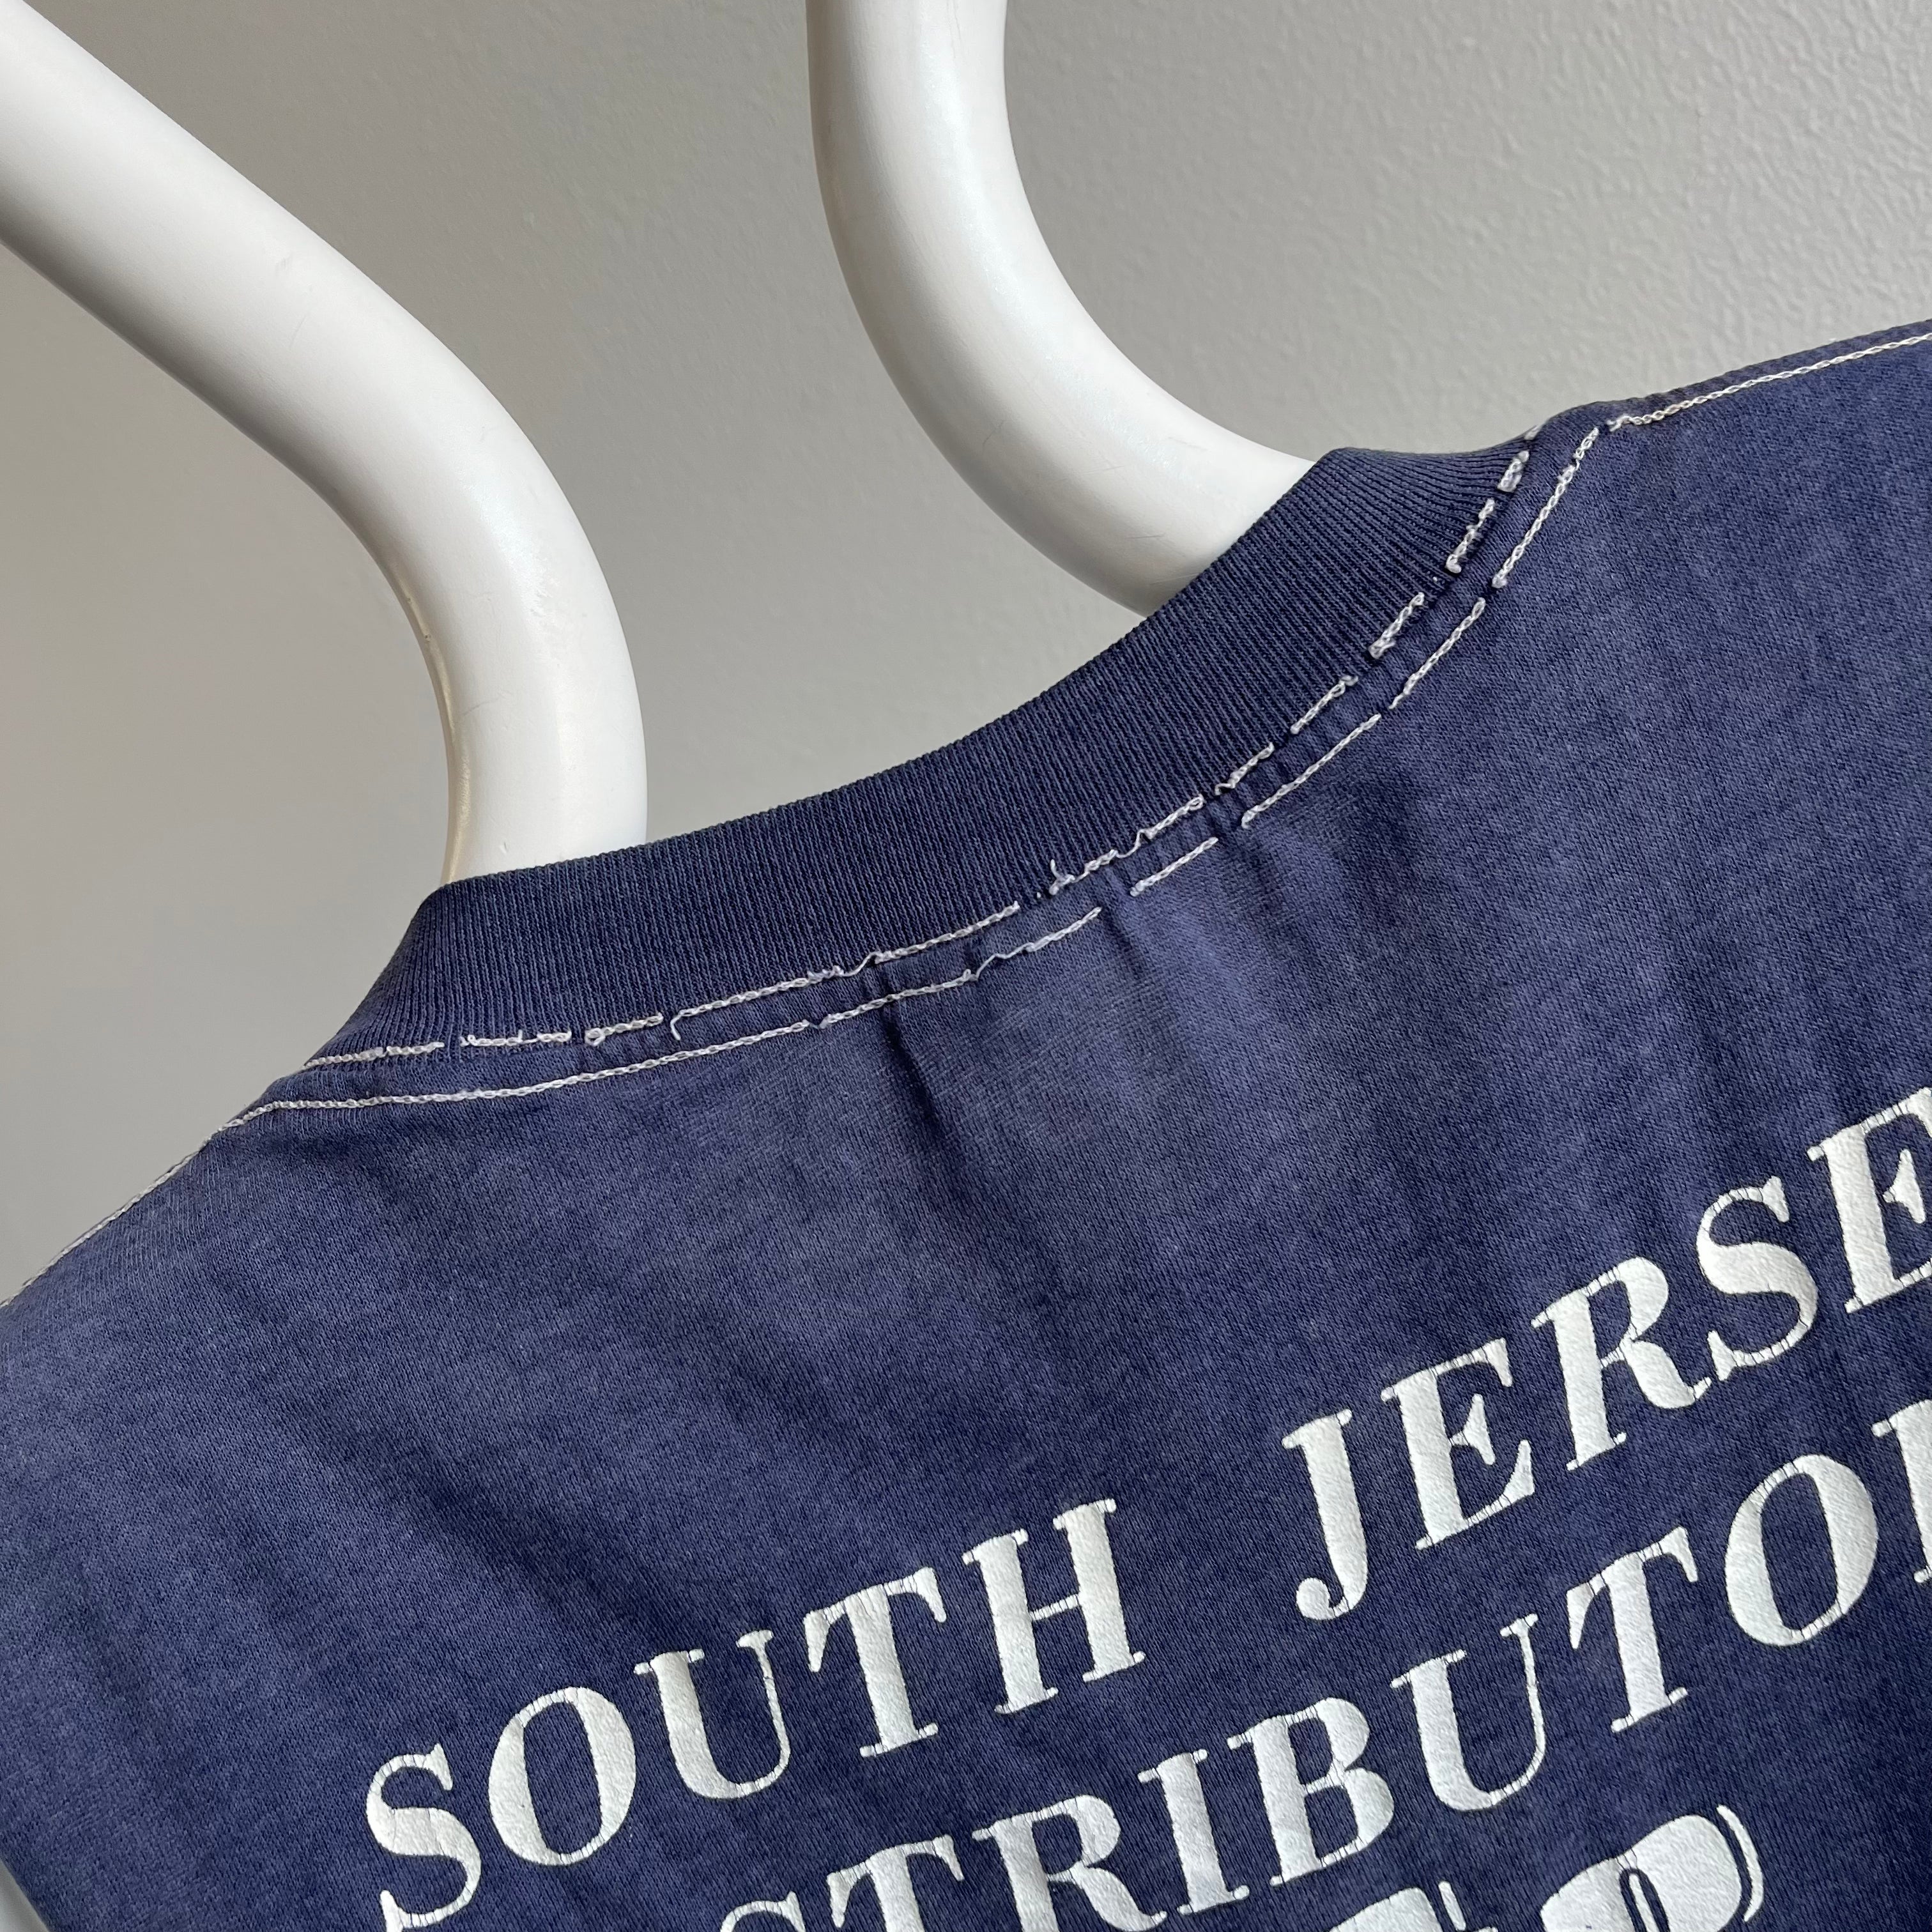 1970/80s South Jersey Lite Beer Front and Back Cut Sleeve Tank